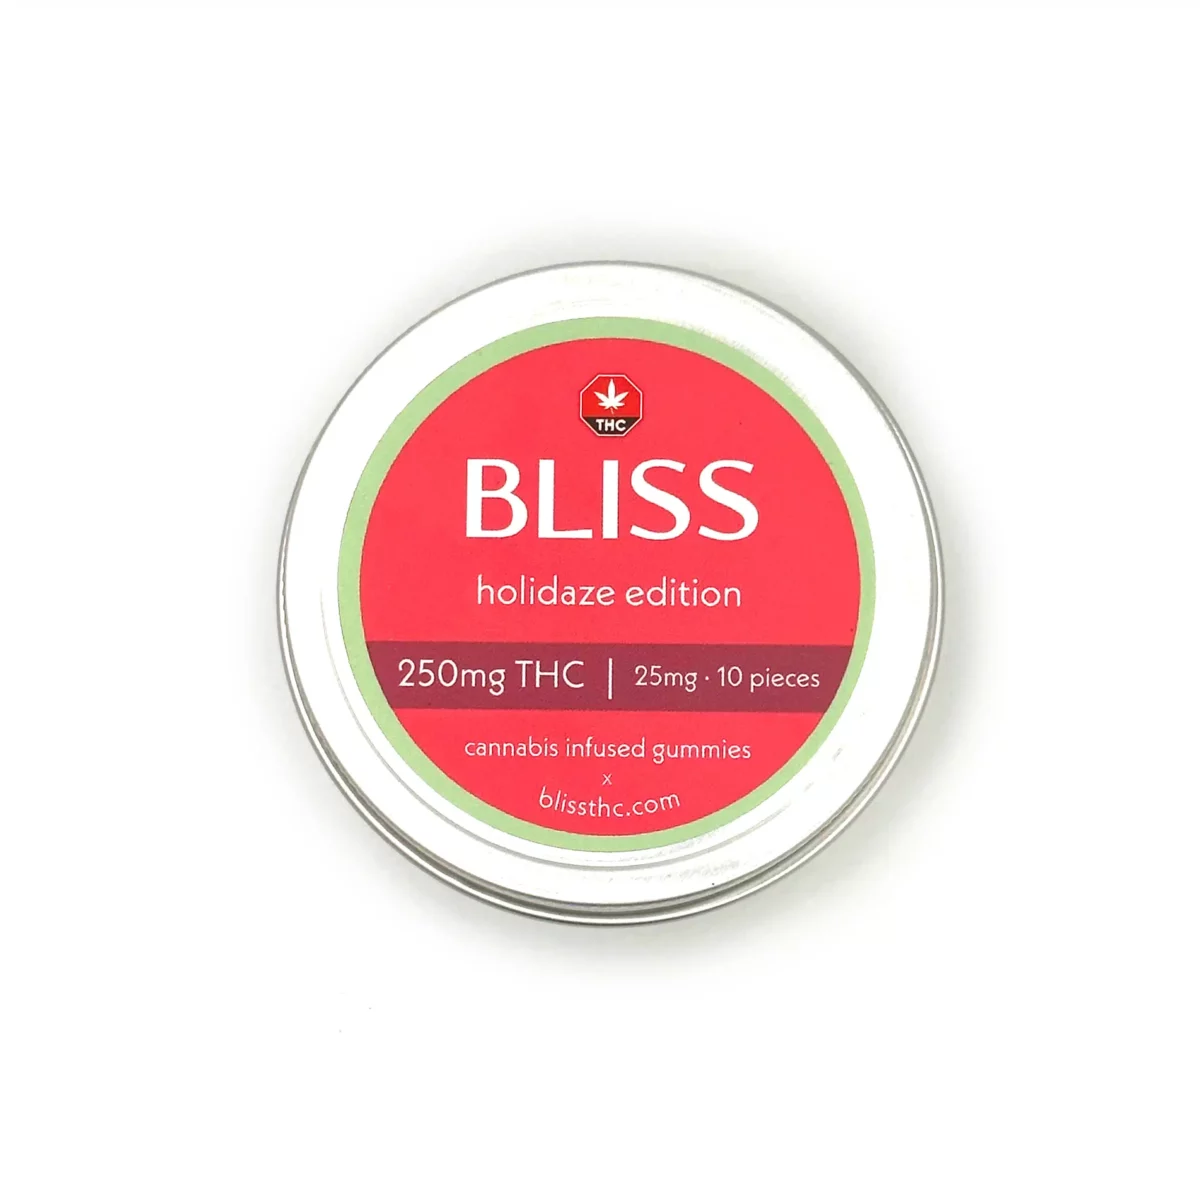 BLISS HOLIDAZE COLLECTION 2 scaled | My Green Solution